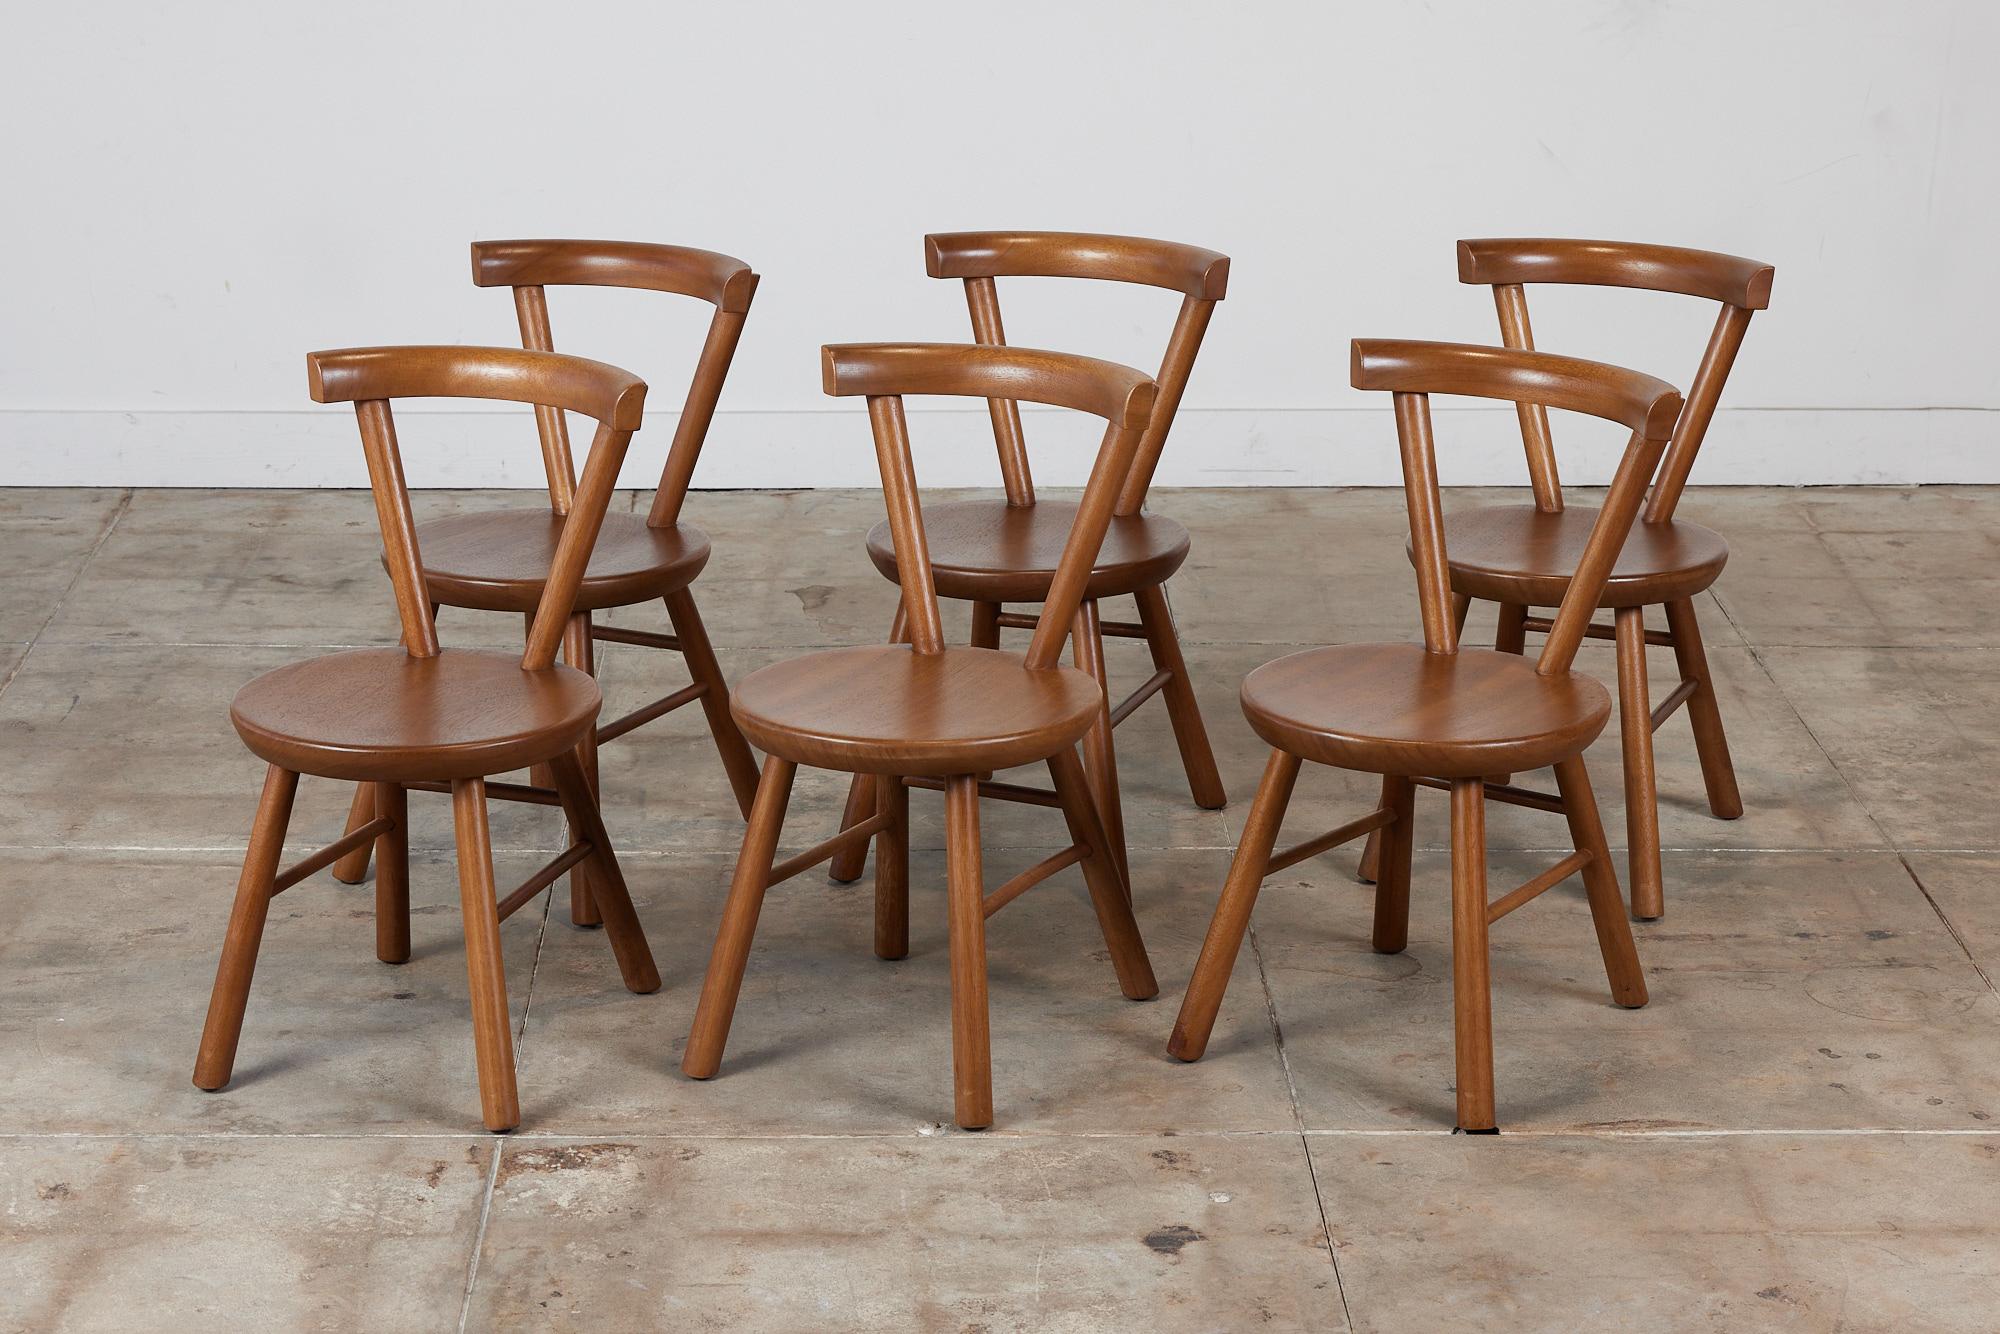 A minimalist set of six solid mahogany dining chairs c.1980s. The chairs are beautifully designed and crafted with a rounded backrest and splayed rounded legs. The minimalist design is comfortable and suits a variety of styles.

Dimensions: 16.5